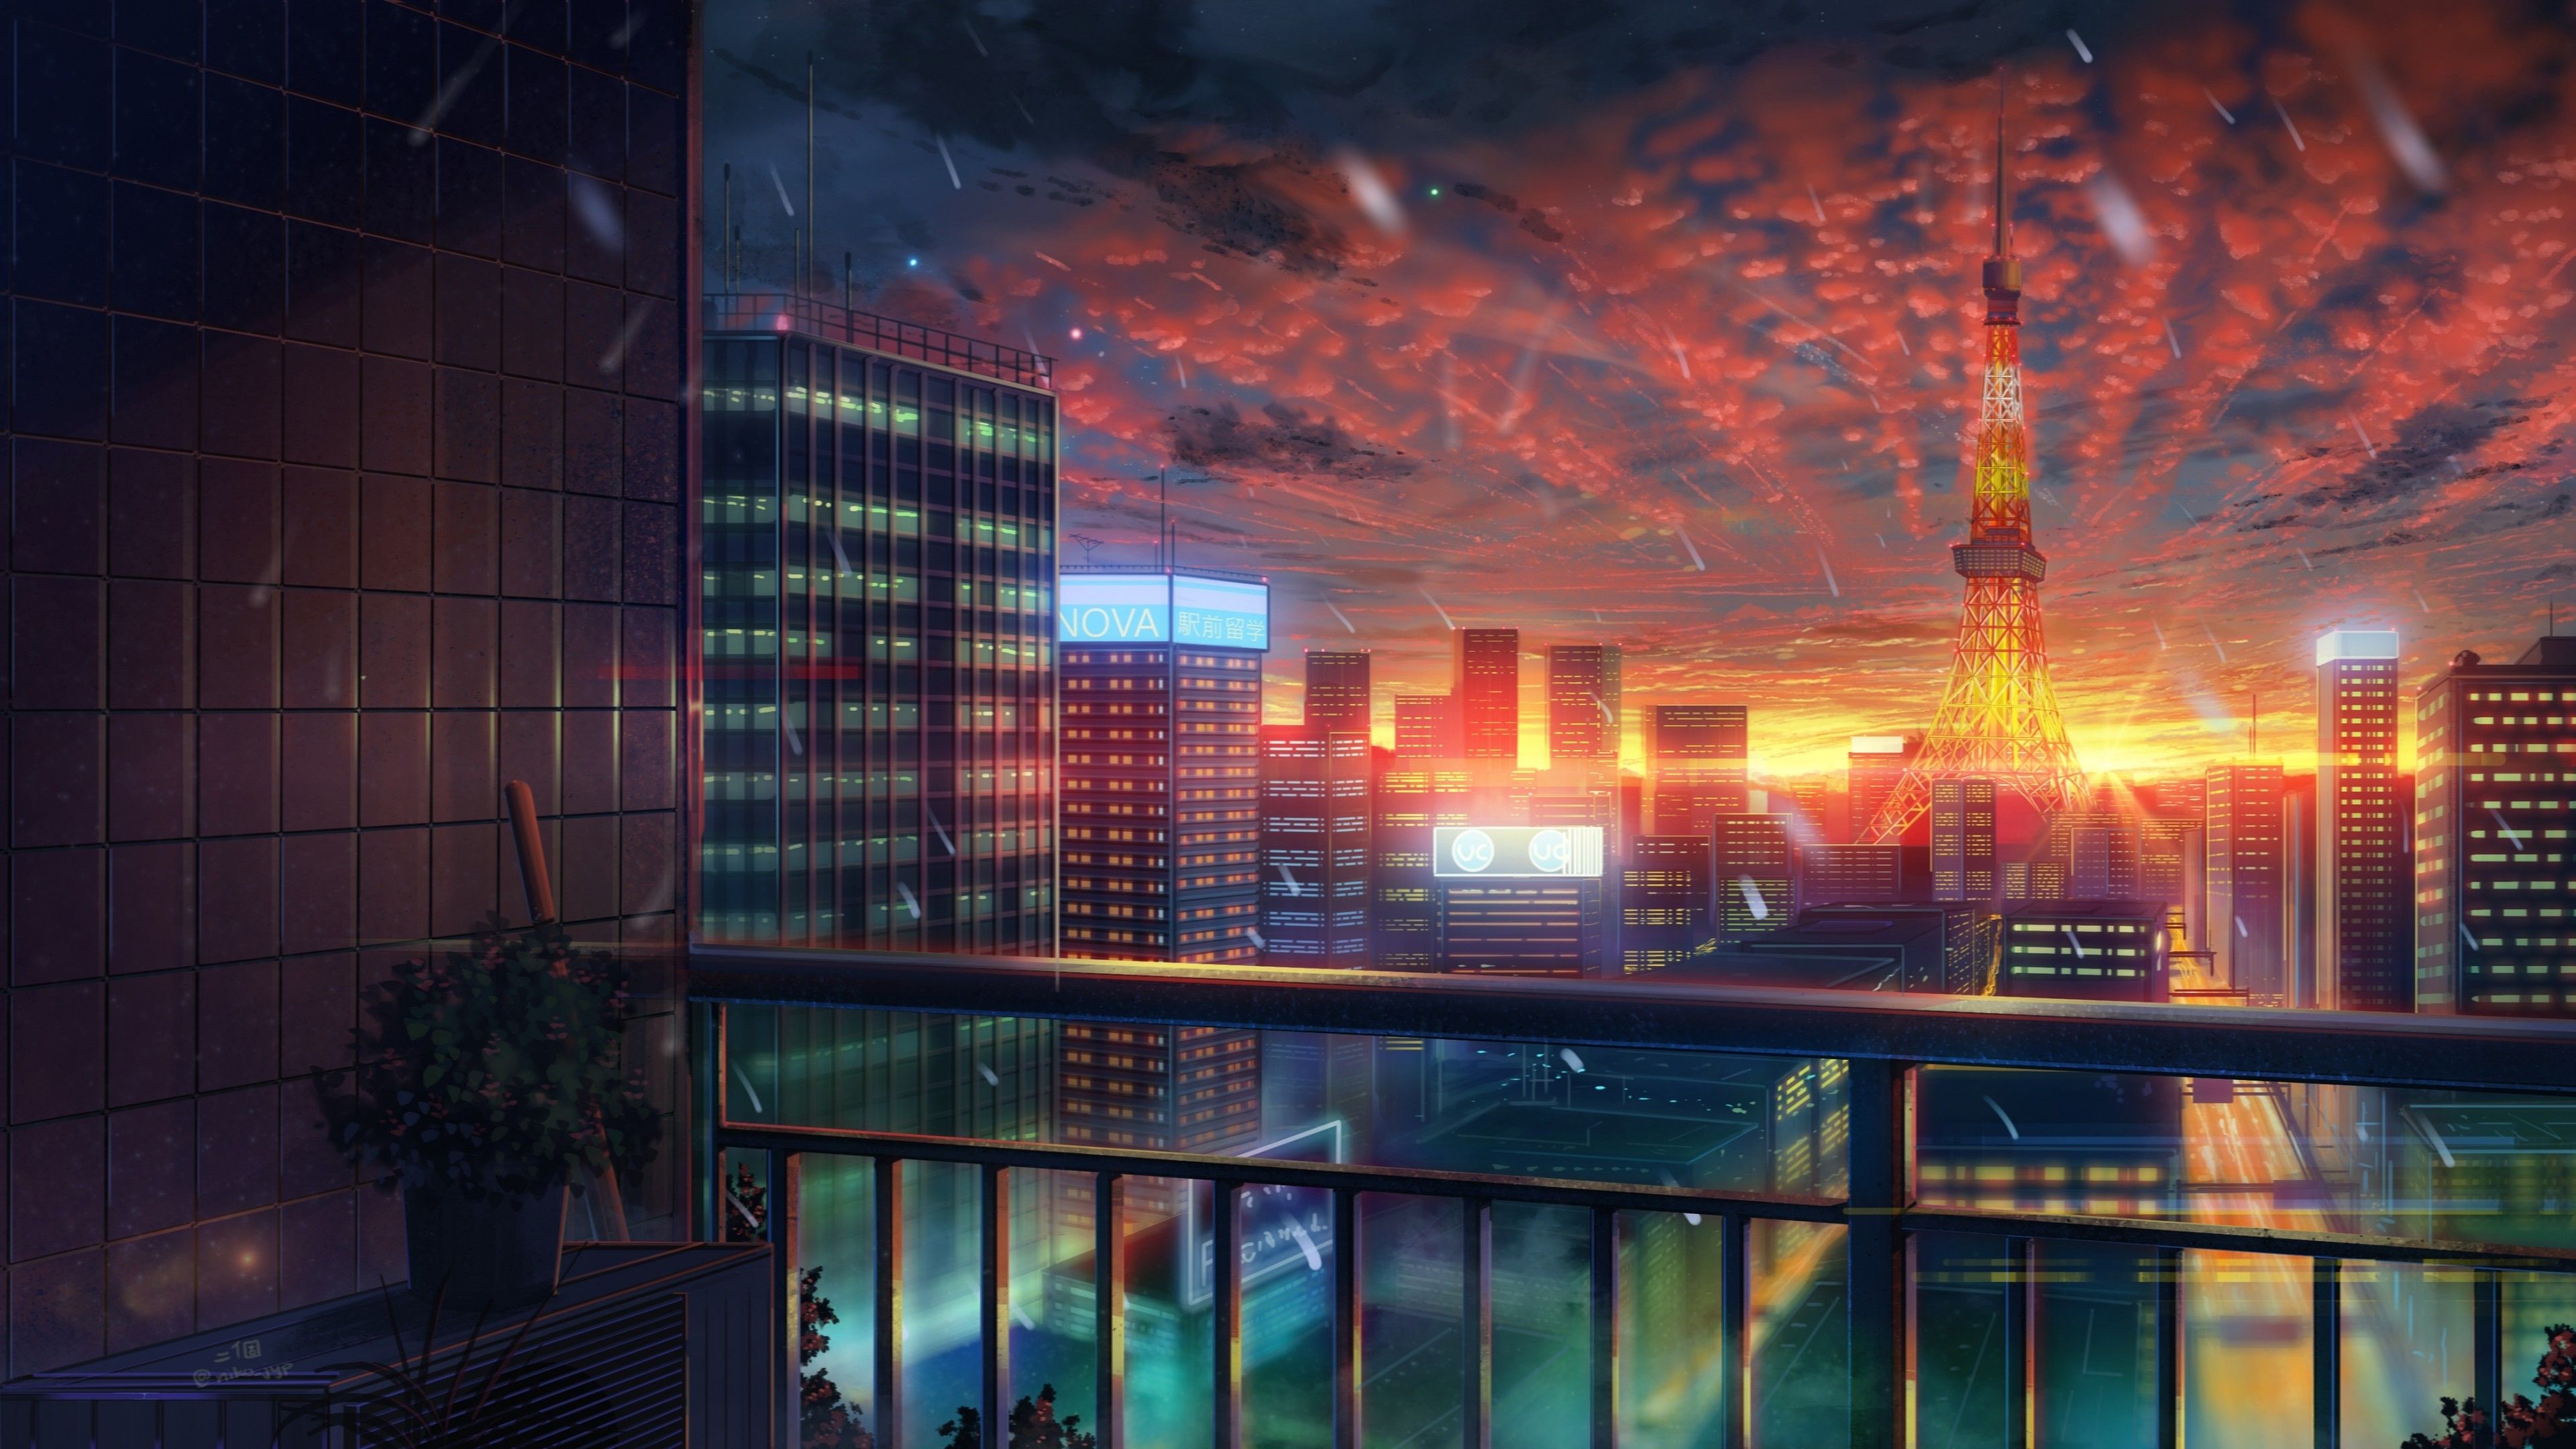 neo - tokyo, anime key visual, anime 4 k, by wlop | Stable Diffusion |  OpenArt